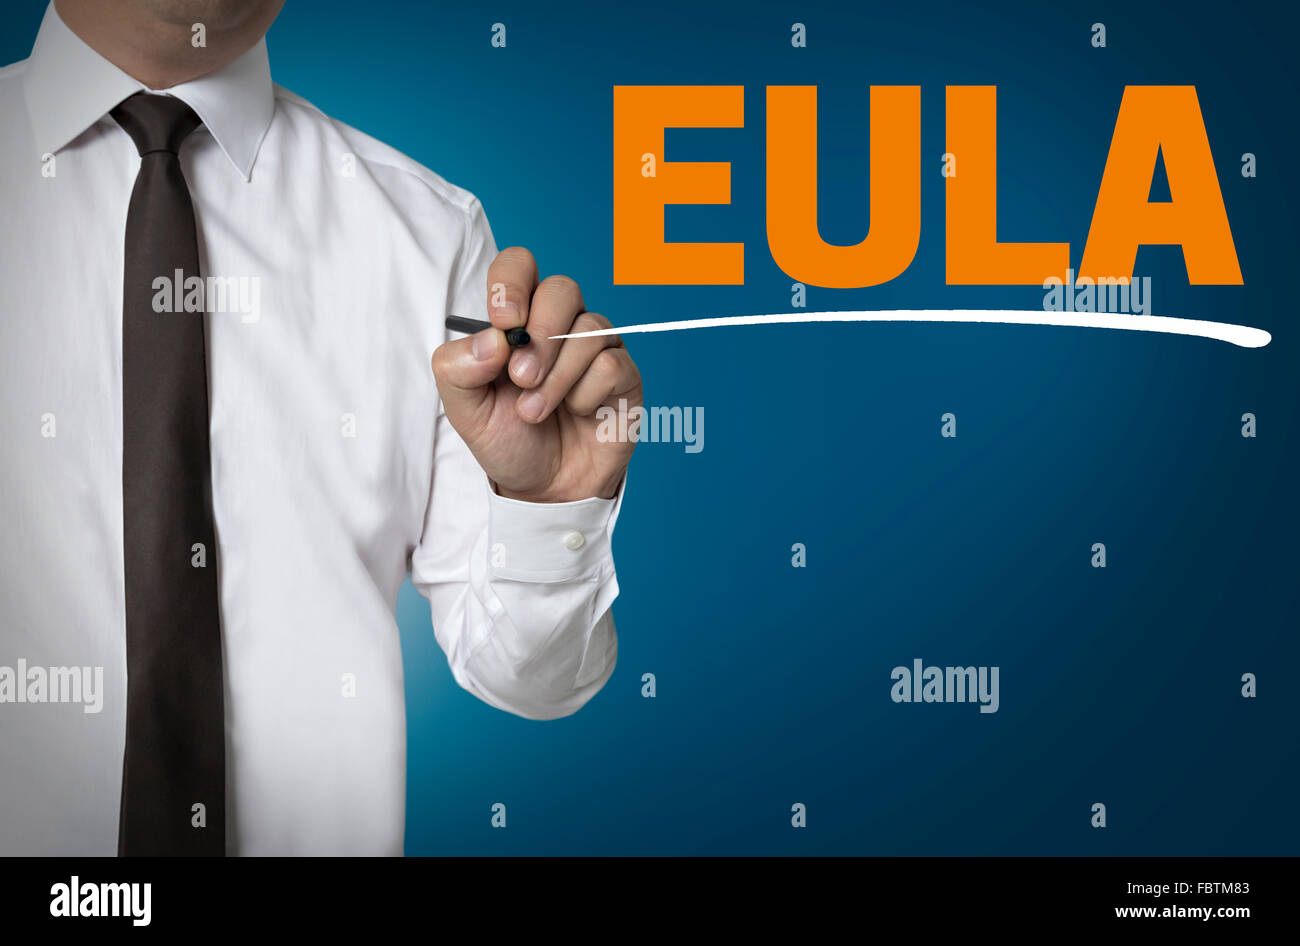 Eula is written by businessman background concept. Stock Photo